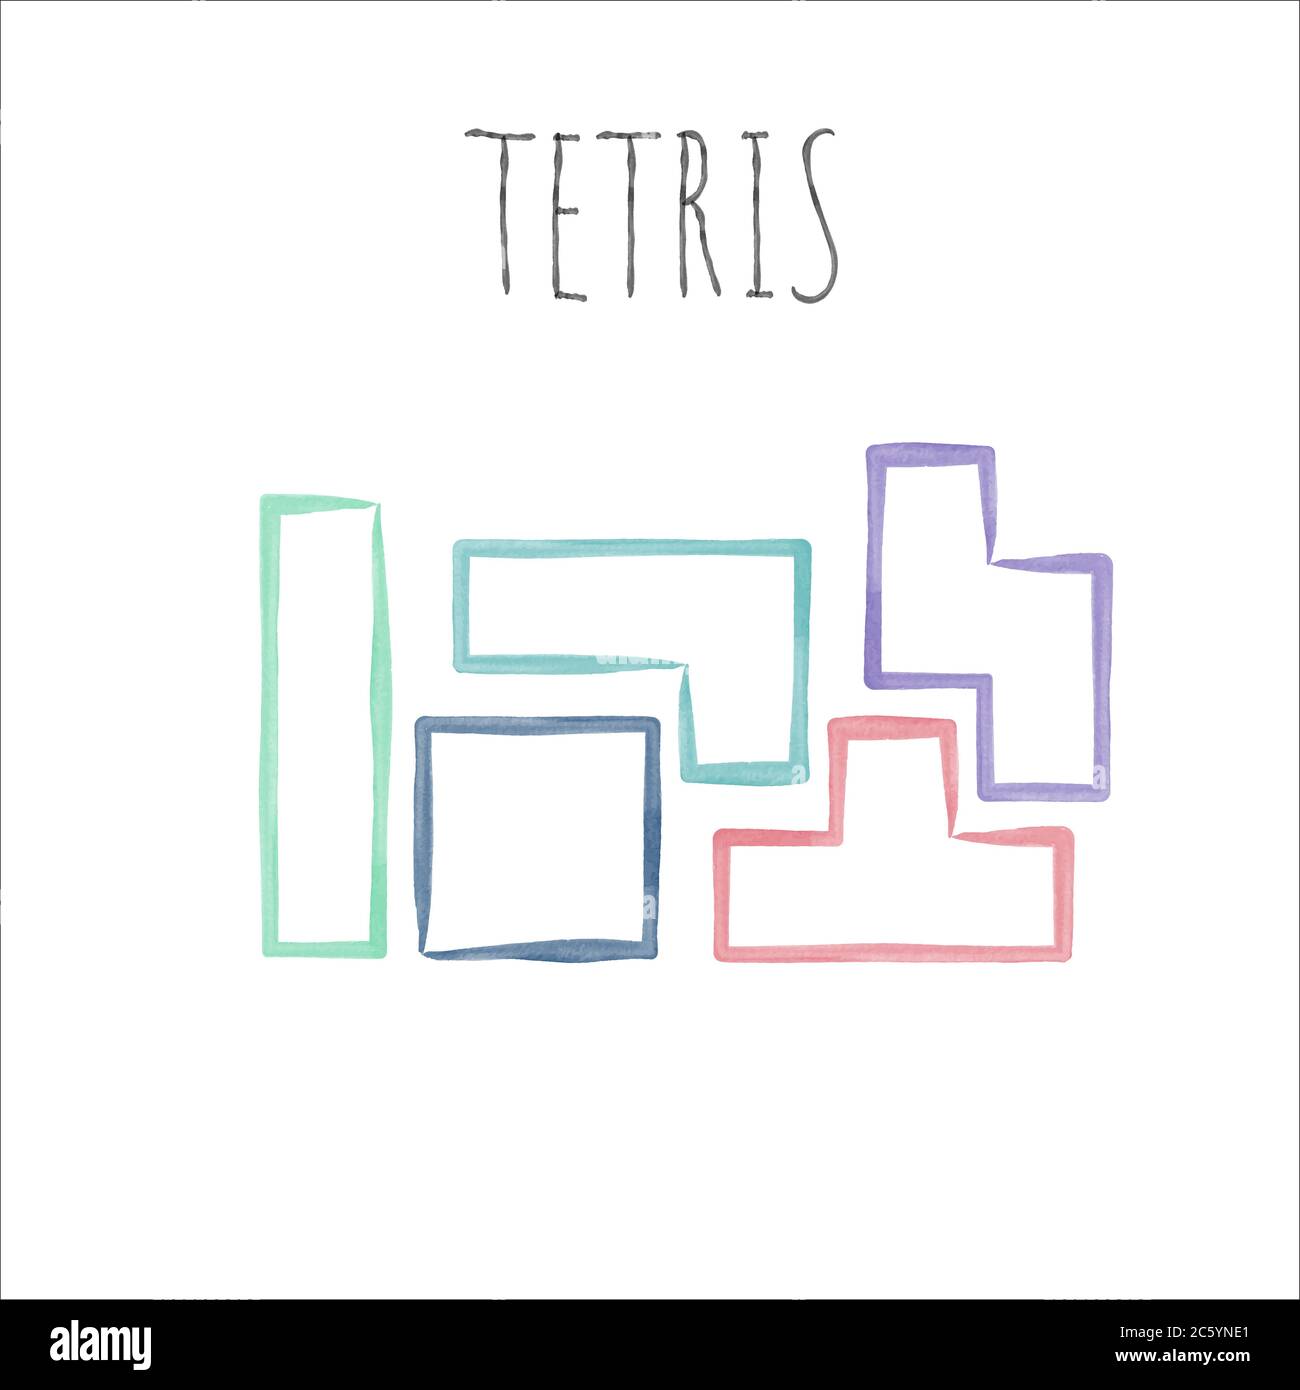 Watercolor linear tetris bricks or shapes. Stock vector illustration isolated on white background. Stock Vector